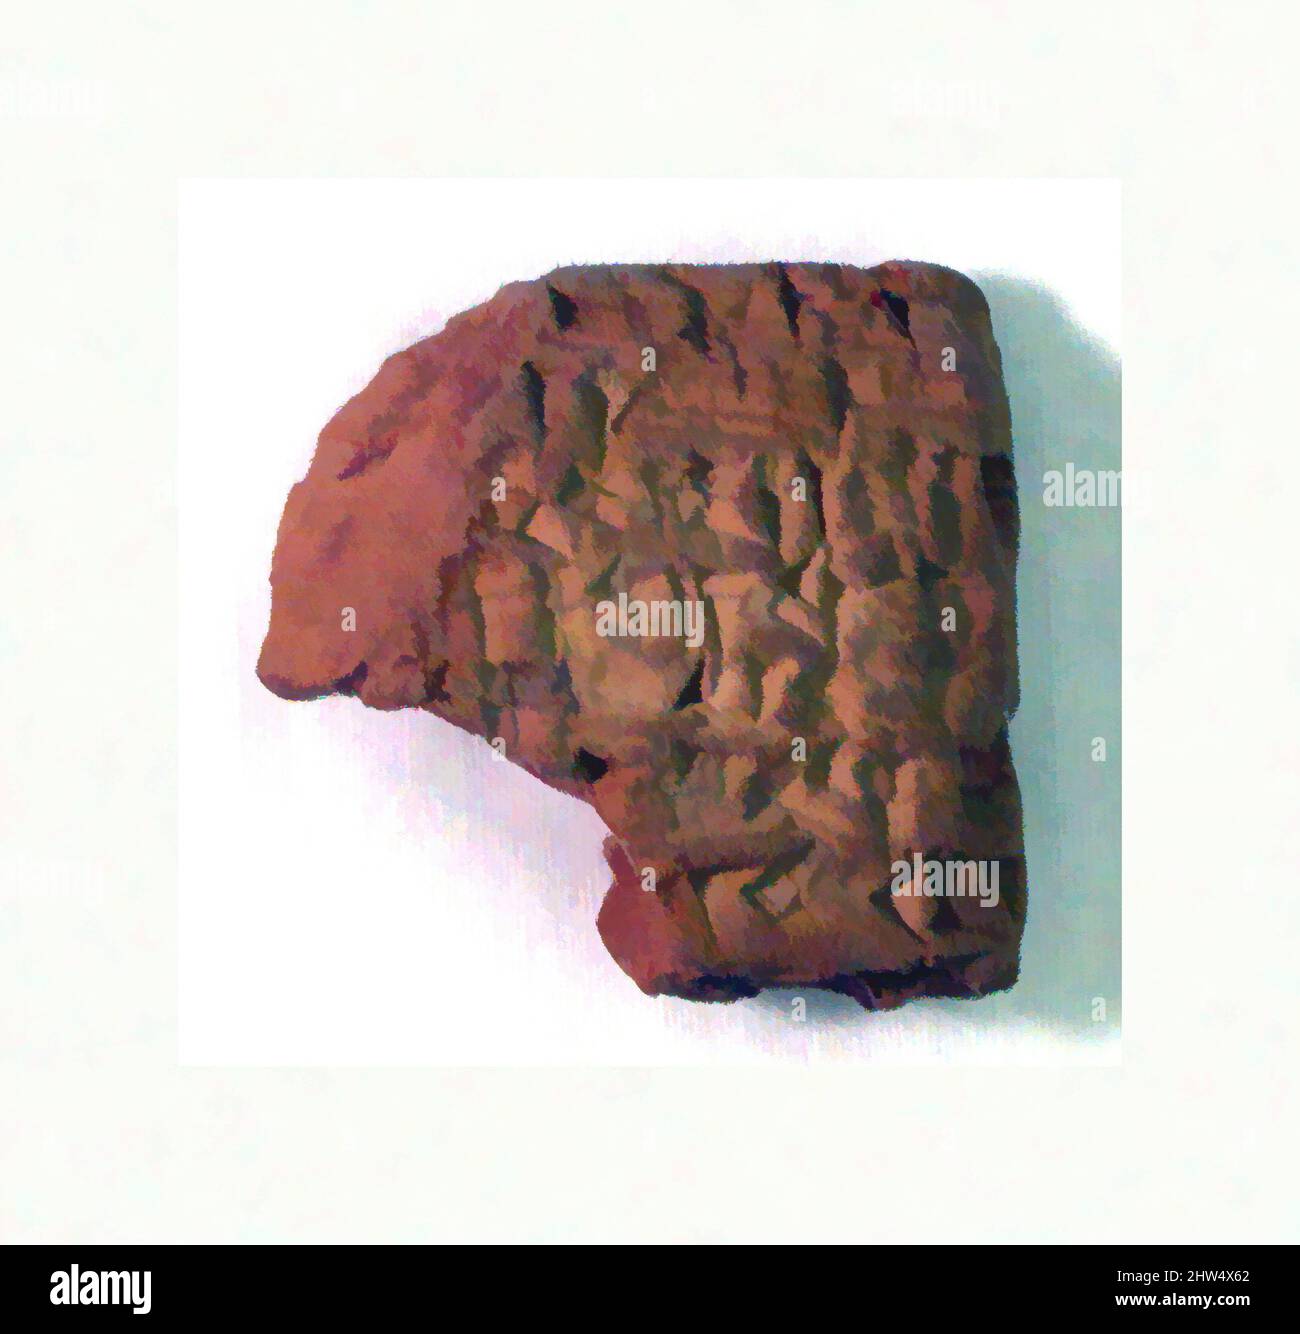 Art inspired by Cuneiform tablet: fragment of a quittance (?), Neo-Babylonian, ca. 625 or 603 B.C., Mesopotamia, Babylonian, Clay, 3.1 x 3.1 x 1.6 cm (1 1/4 x 1 1/4 x 5/8 in.), Clay-Tablets-Inscribed, Classic works modernized by Artotop with a splash of modernity. Shapes, color and value, eye-catching visual impact on art. Emotions through freedom of artworks in a contemporary way. A timeless message pursuing a wildly creative new direction. Artists turning to the digital medium and creating the Artotop NFT Stock Photo